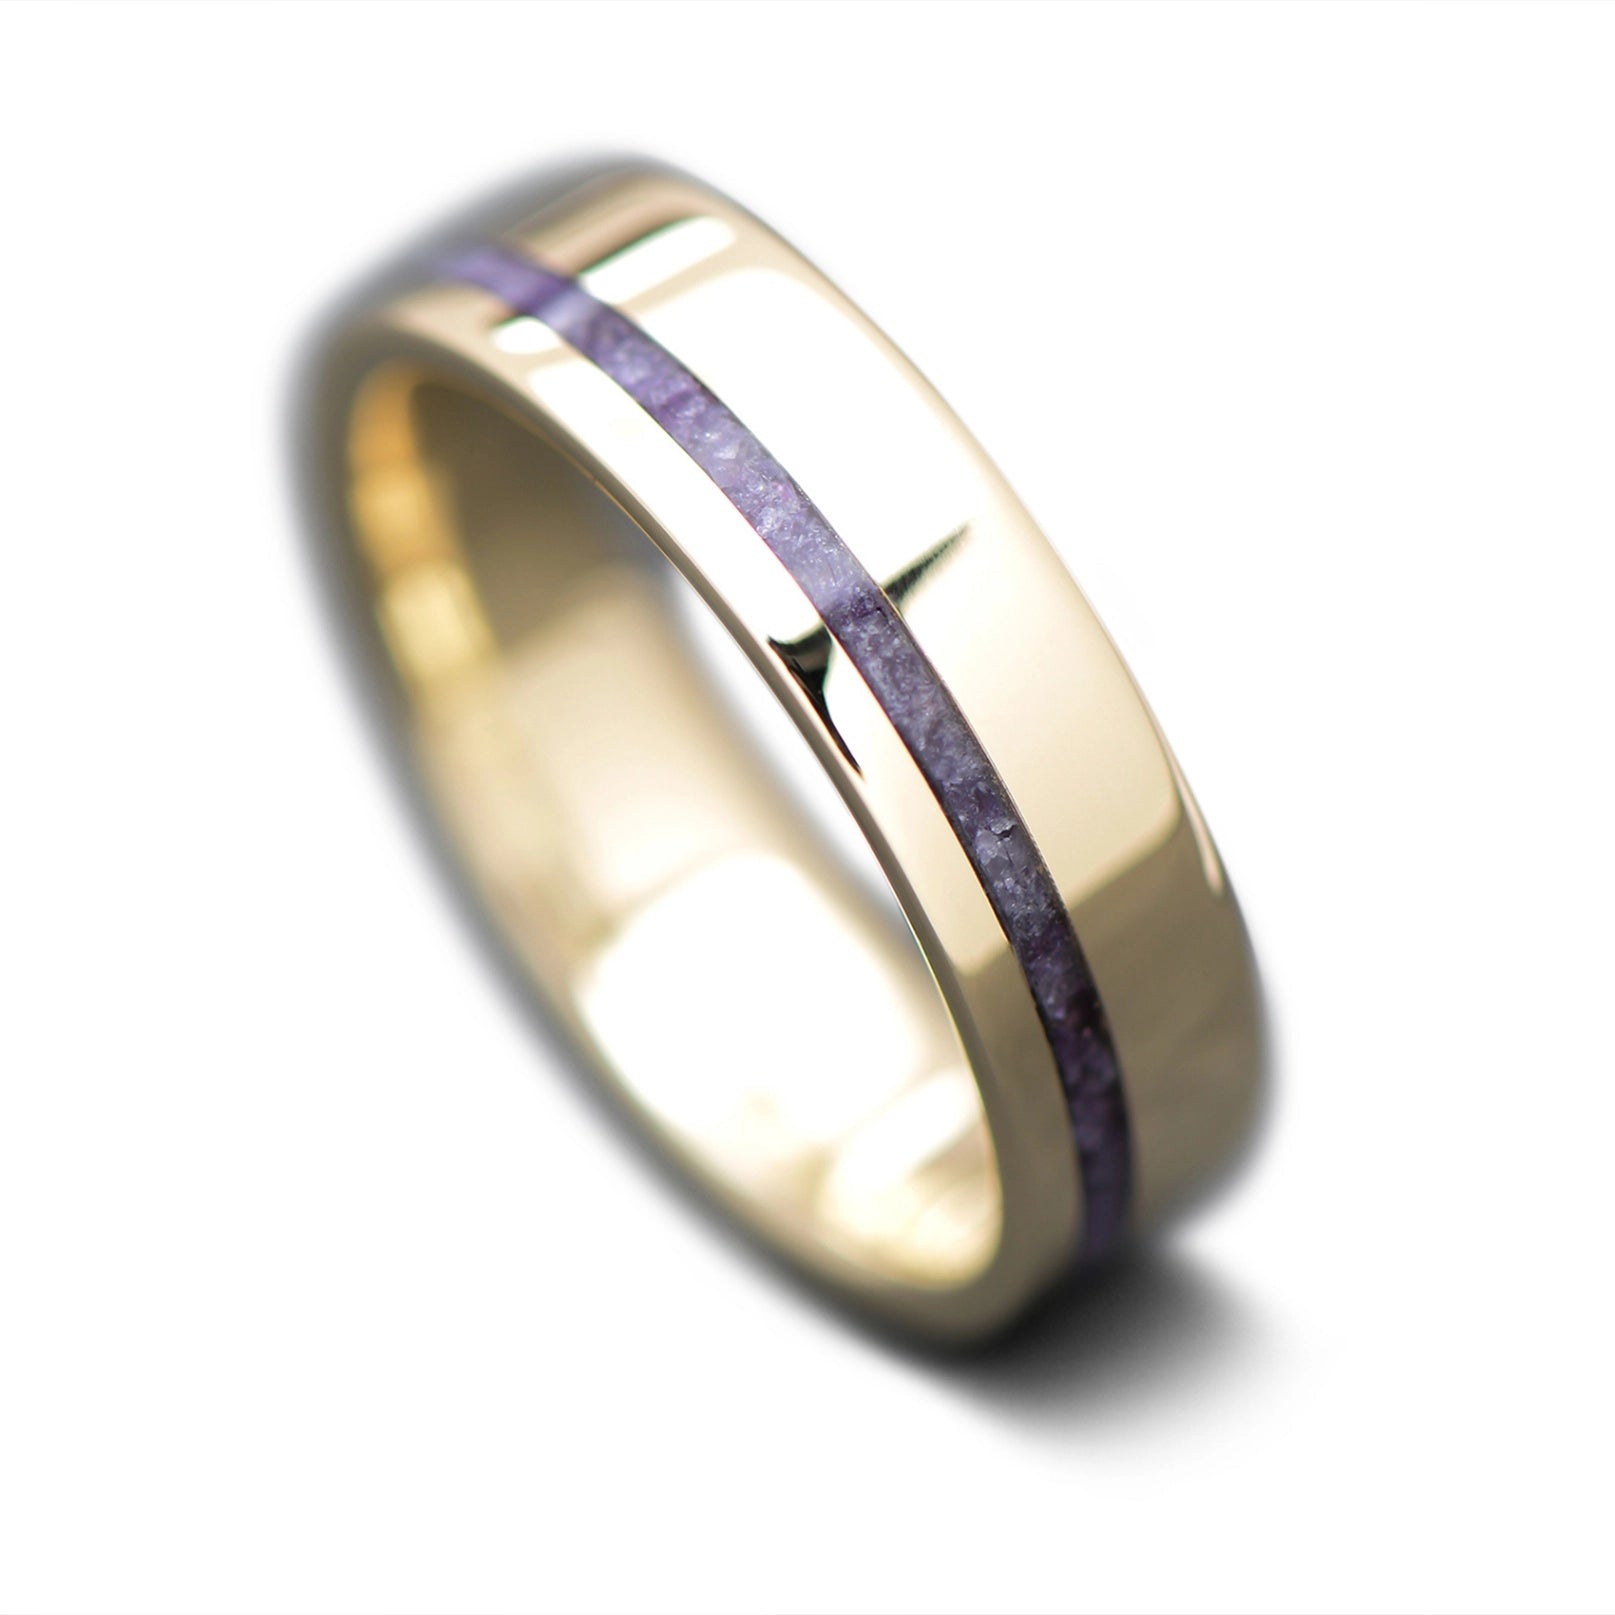 Yellow Gold wedding ring with Amethyst inlay, 6mm -THE COMMITMENT